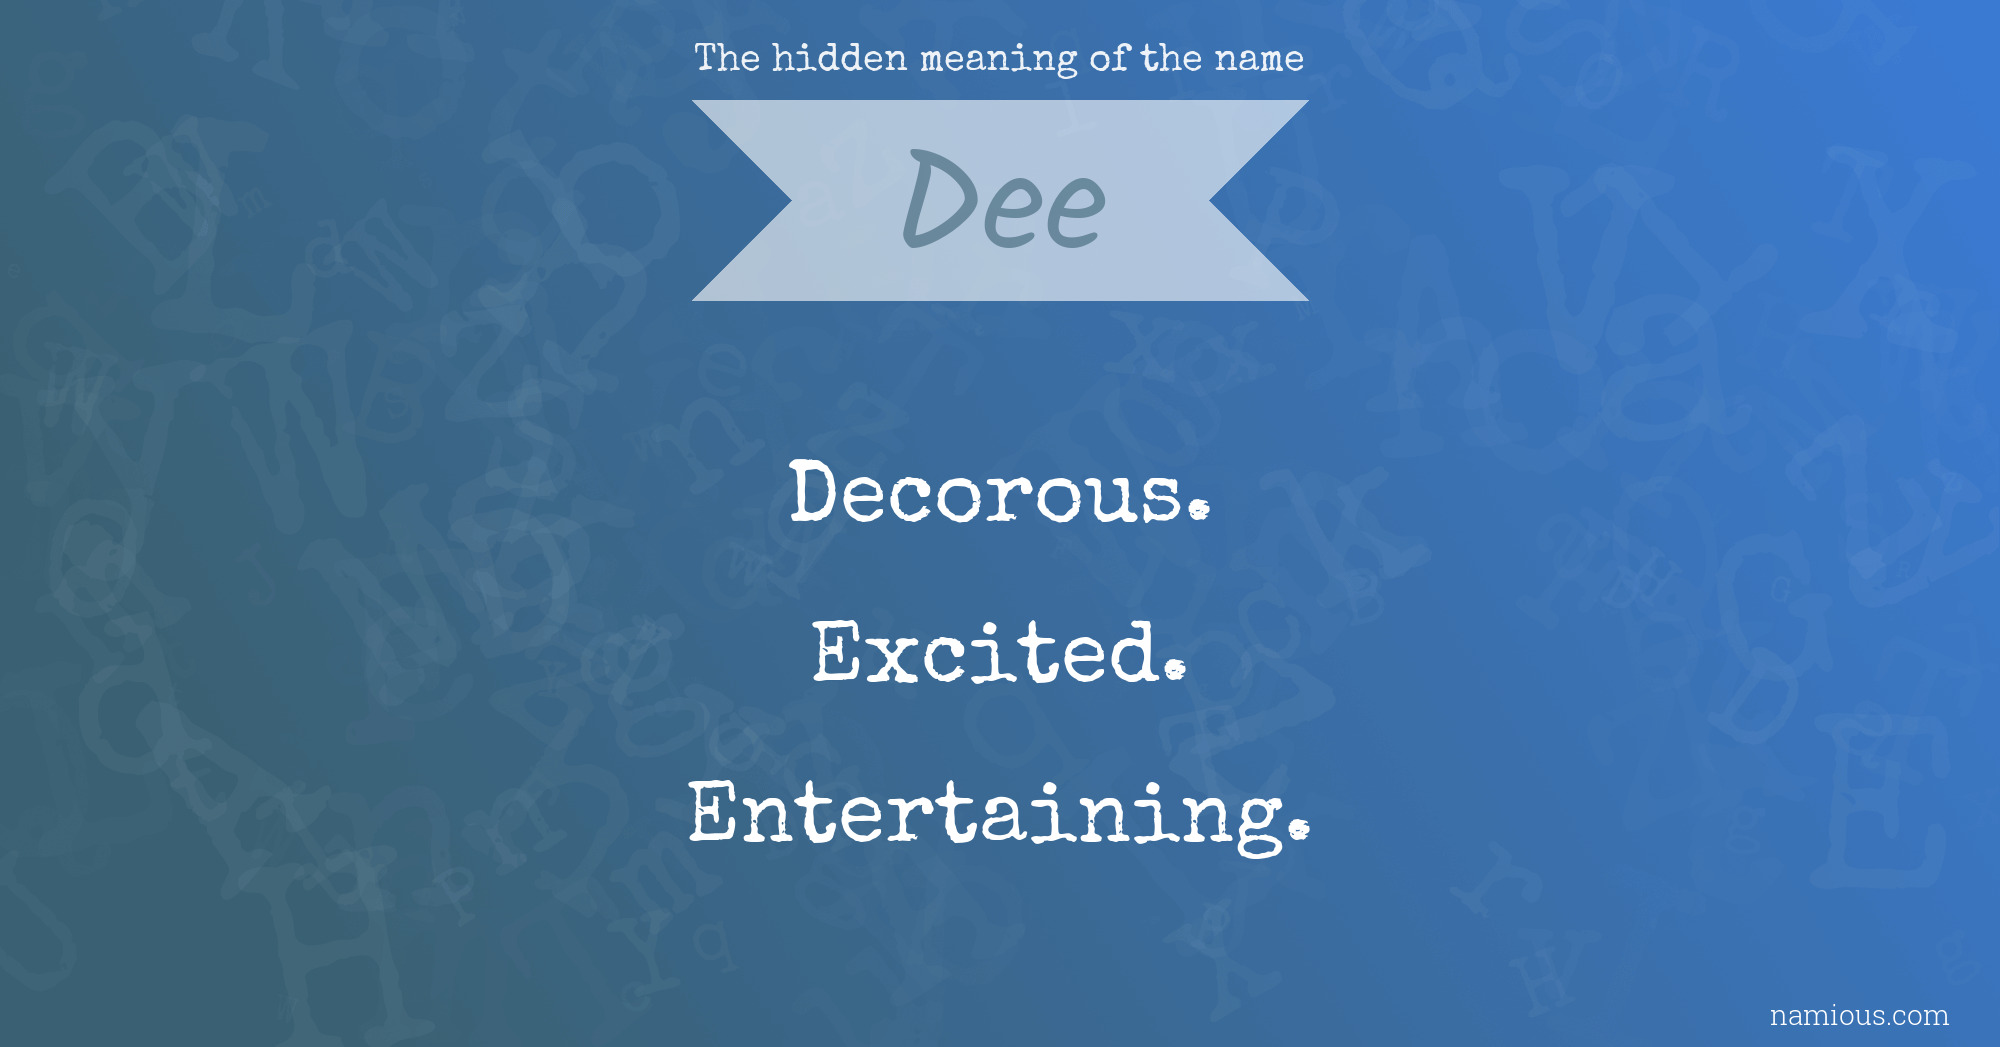 The hidden meaning of the name Dee